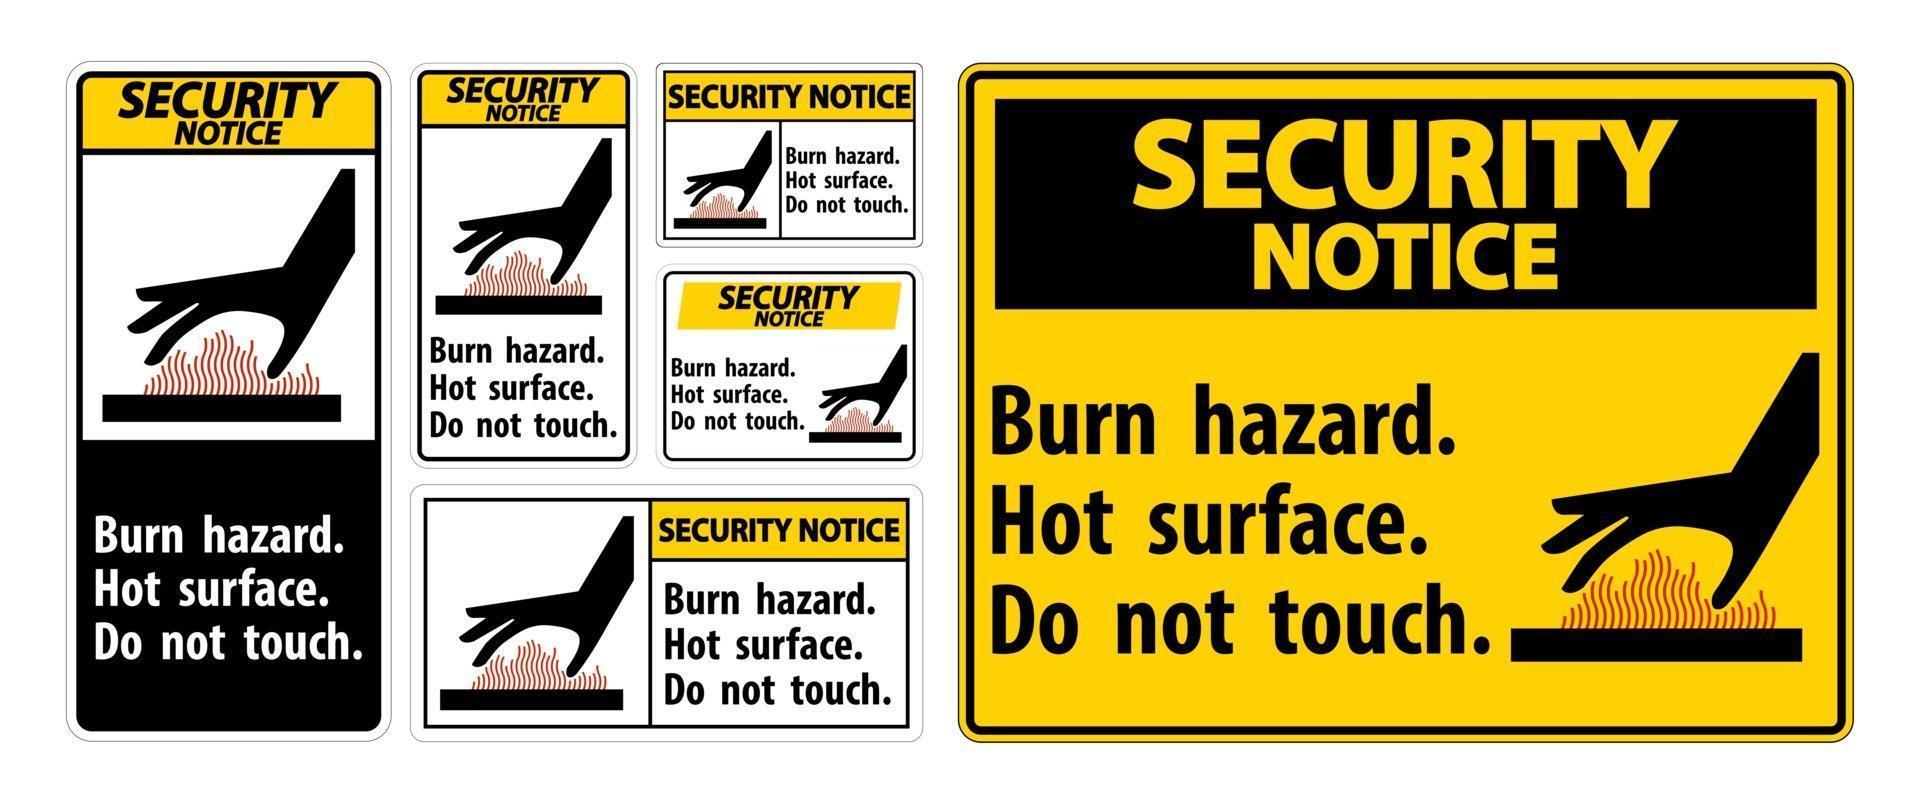 Security Notice Burn hazard,Hot surface,Do not touch vector